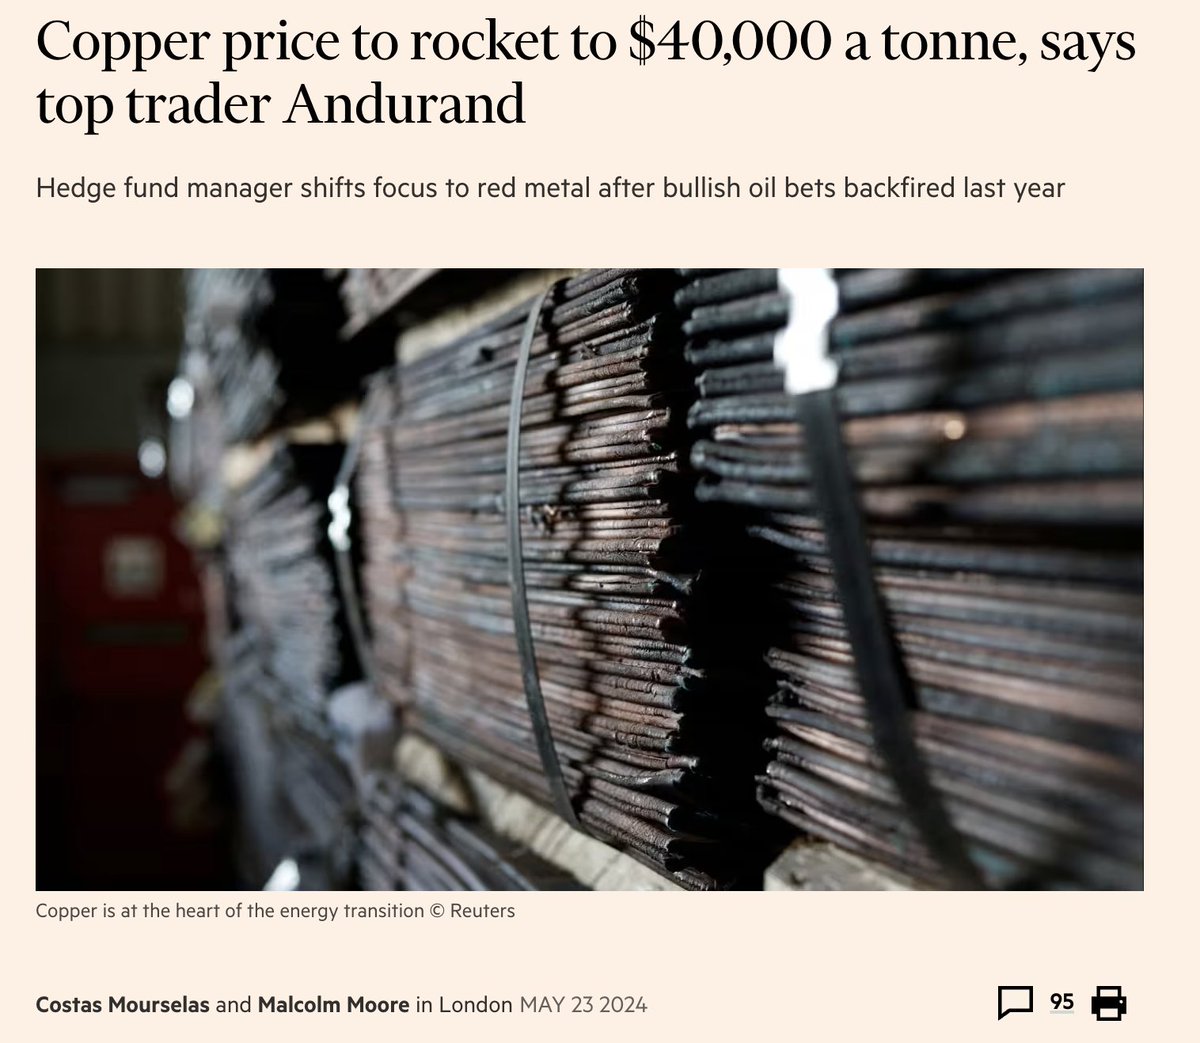 Copper will quadruple to $40,000 within the next few years says Hedge Fund Manager Pierre Andurand